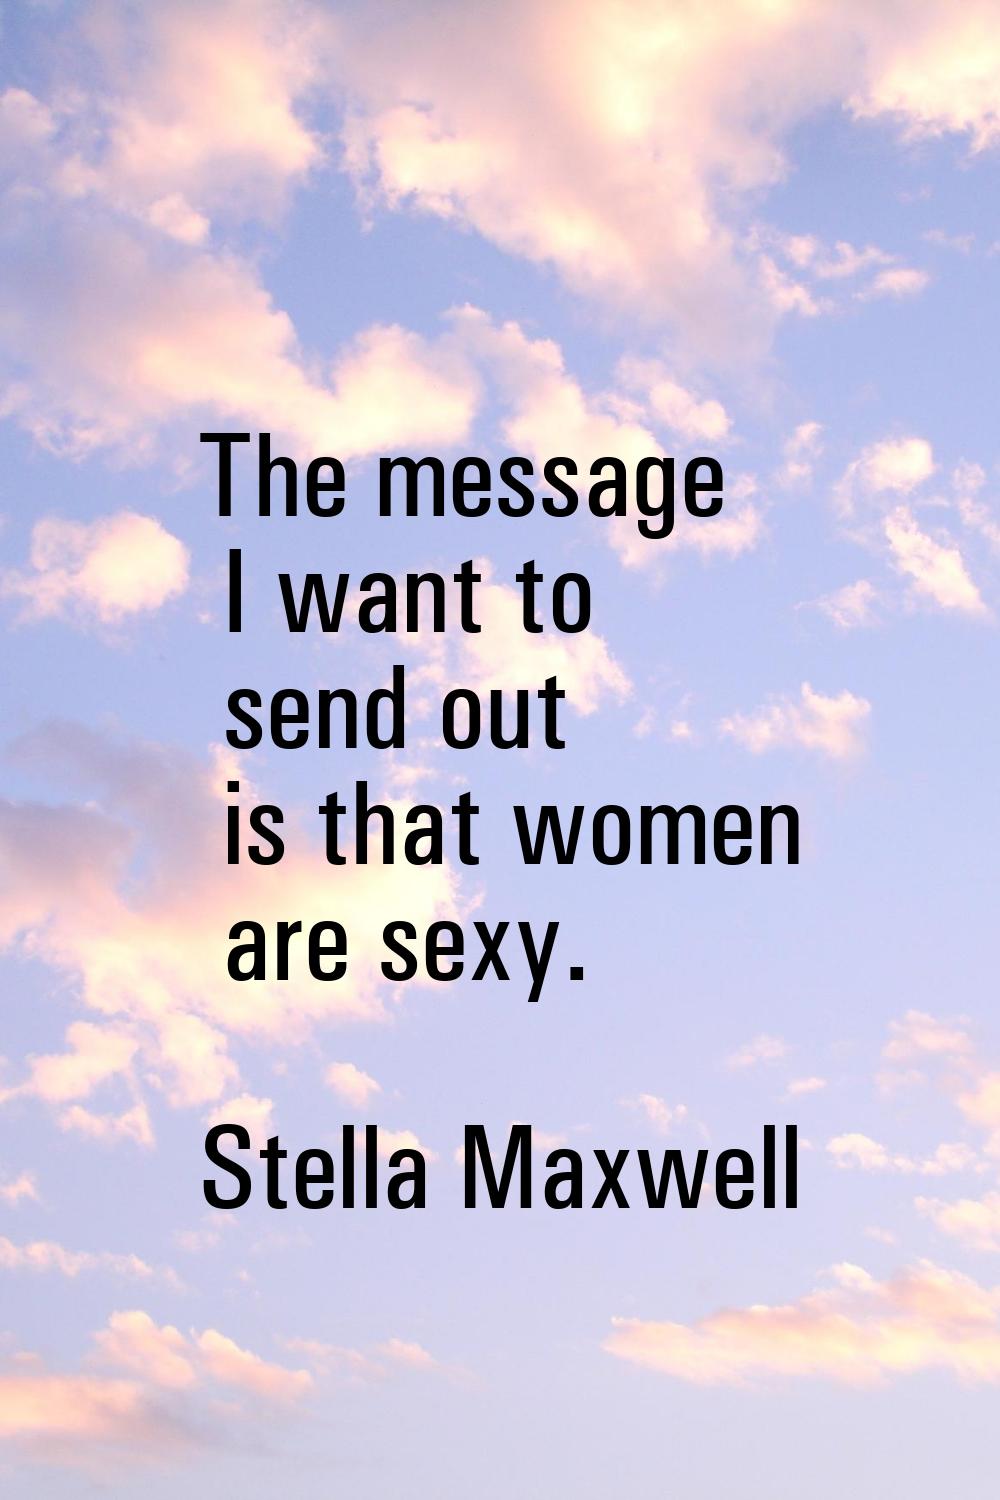 The message I want to send out is that women are sexy.